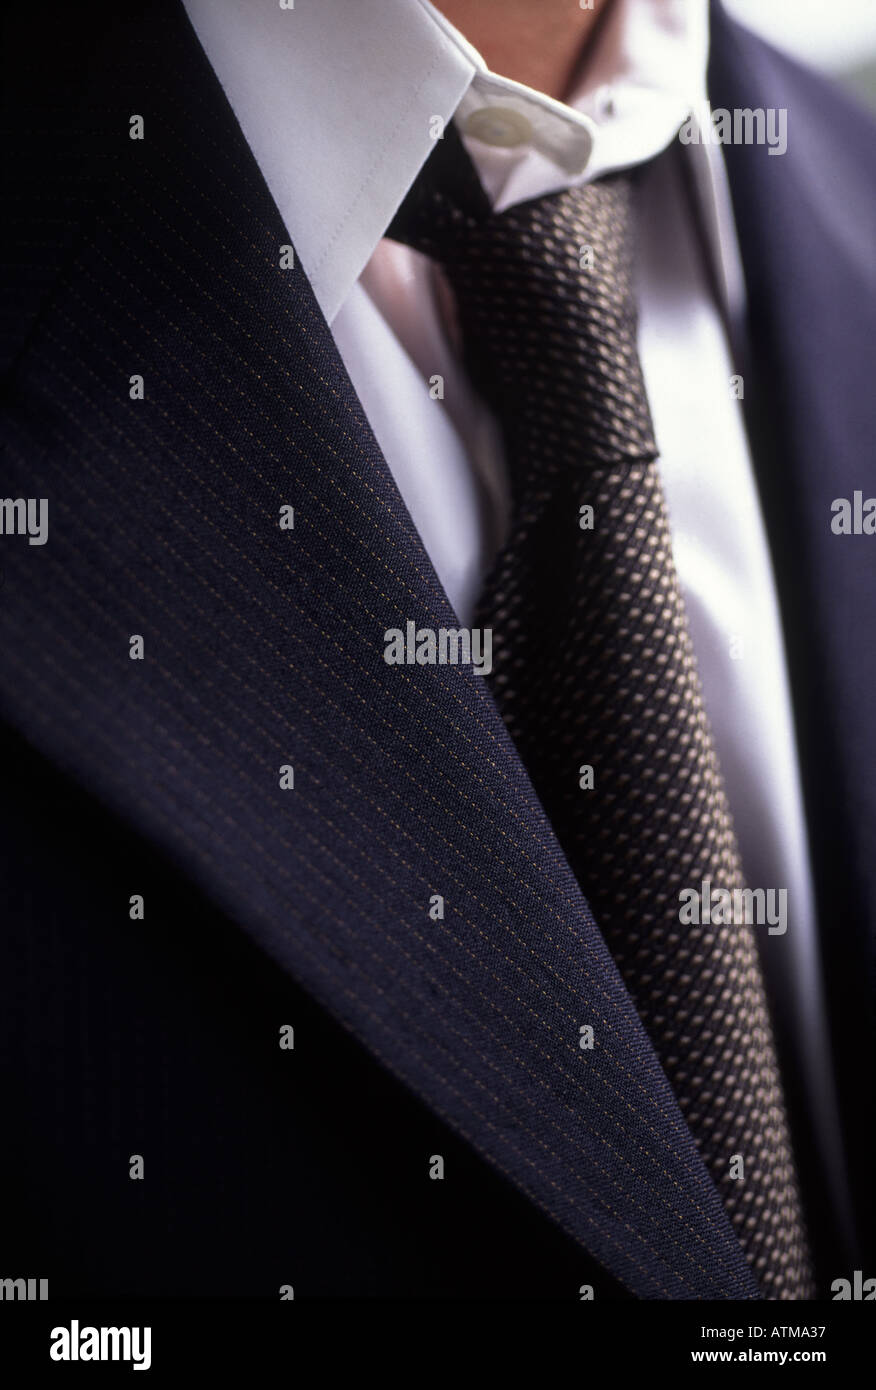 Men's suit and loosened tie white shirt. Stock Photo